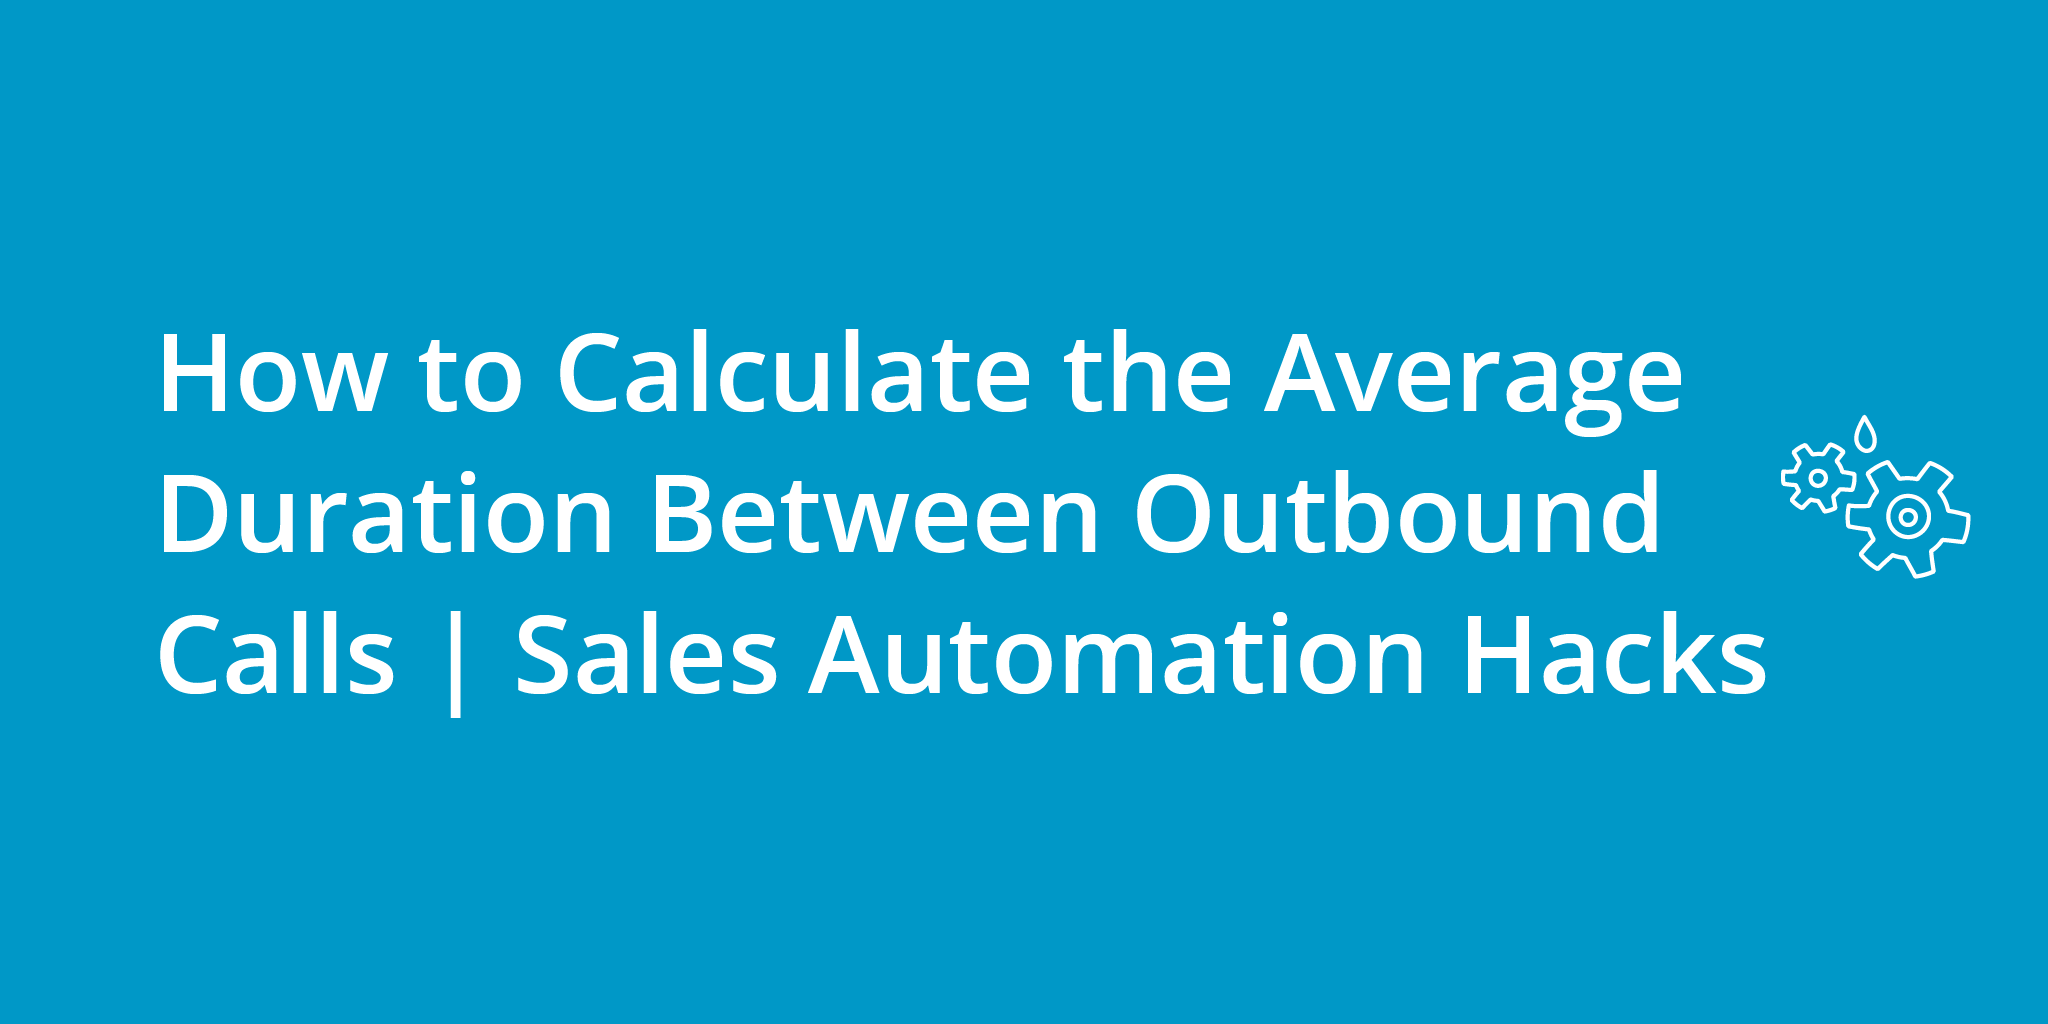 How to Calculate the Average Duration Between Outbound Calls | Sales Automation Hacks